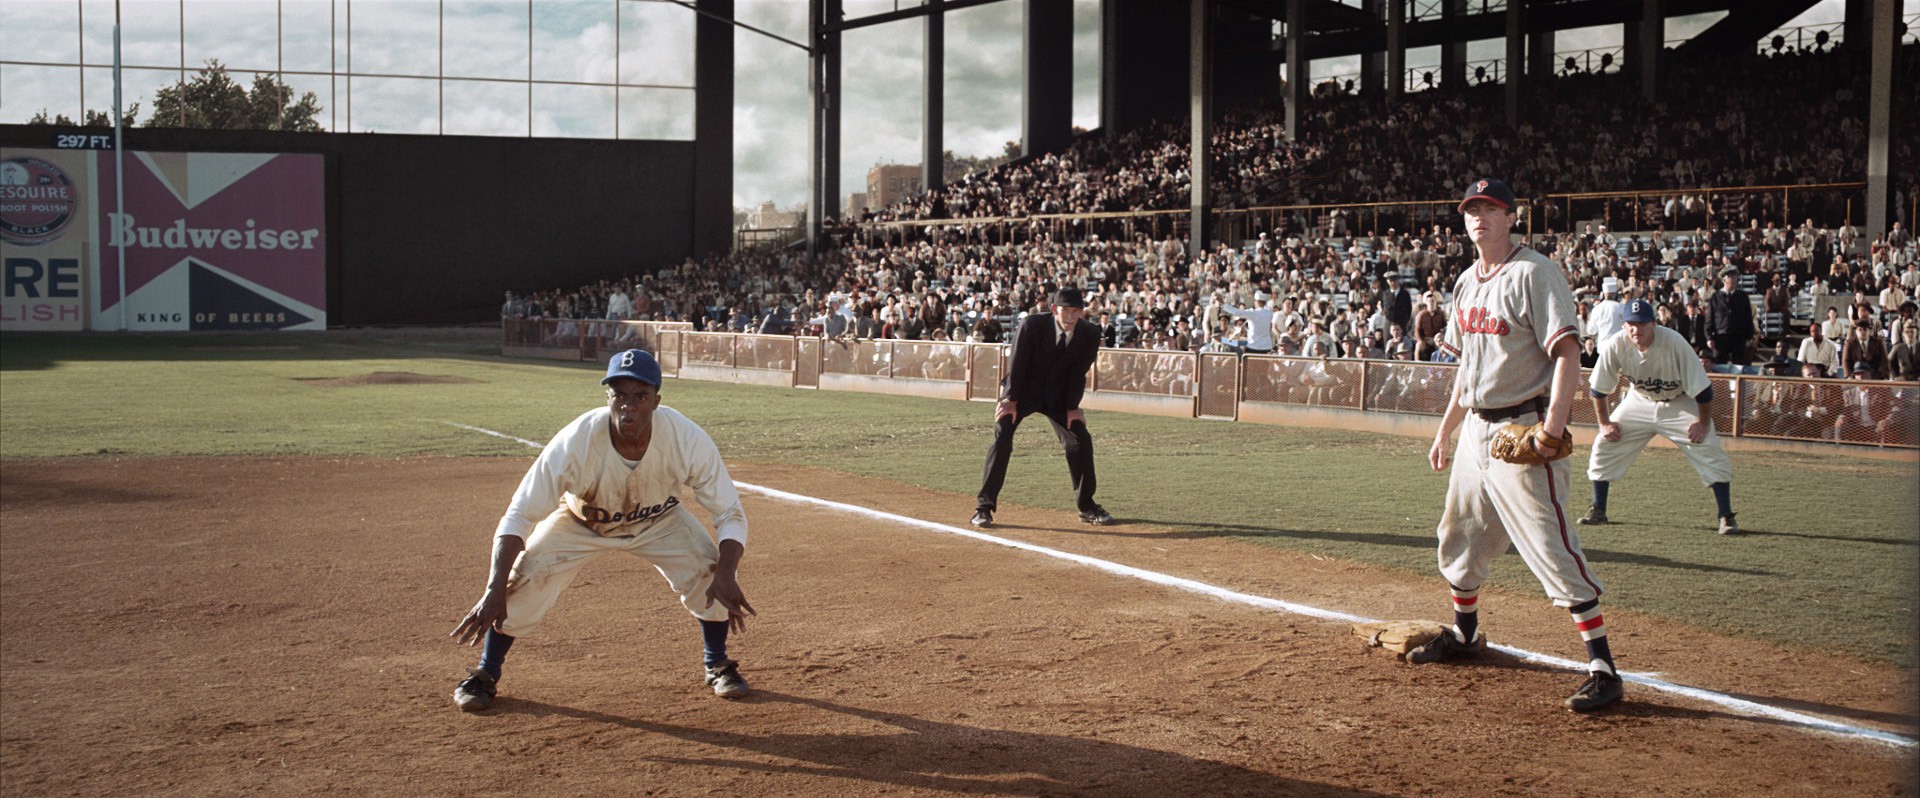 Chadwick Boseman stars as Jackie Robinson in Warner Bros. Pictures' 42 (2013)